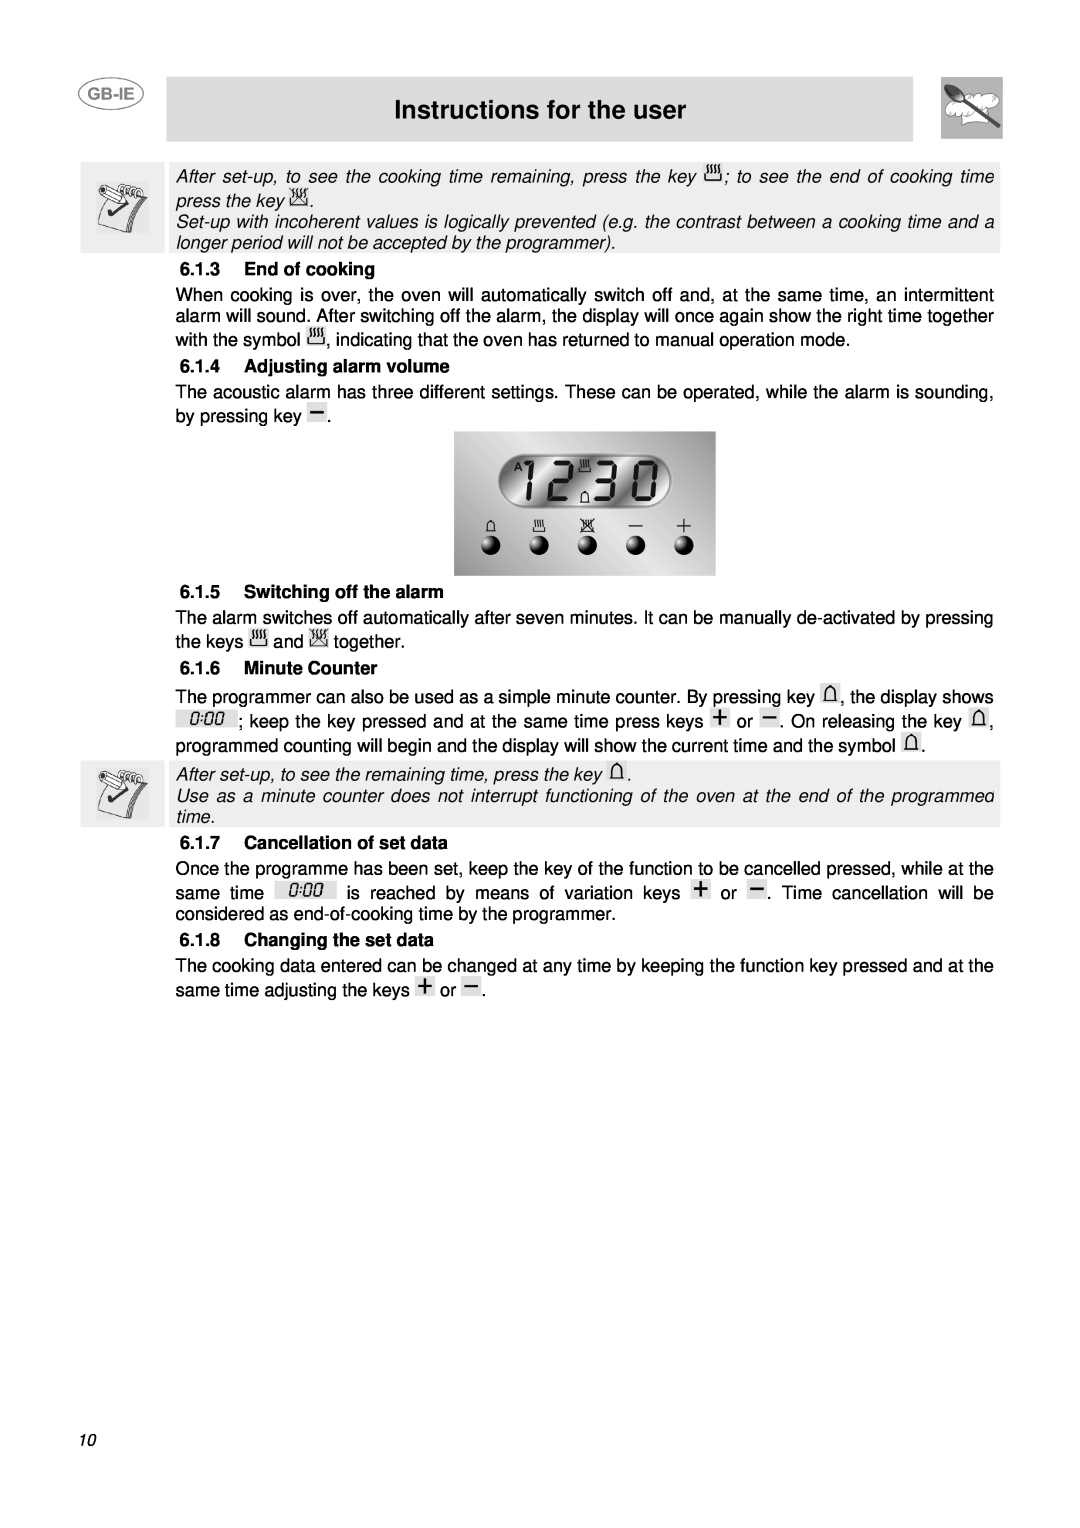 Smeg DUCO4SS Instructions for the user, End of cooking, Adjusting alarm volume, Switching off the alarm, Minute Counter 